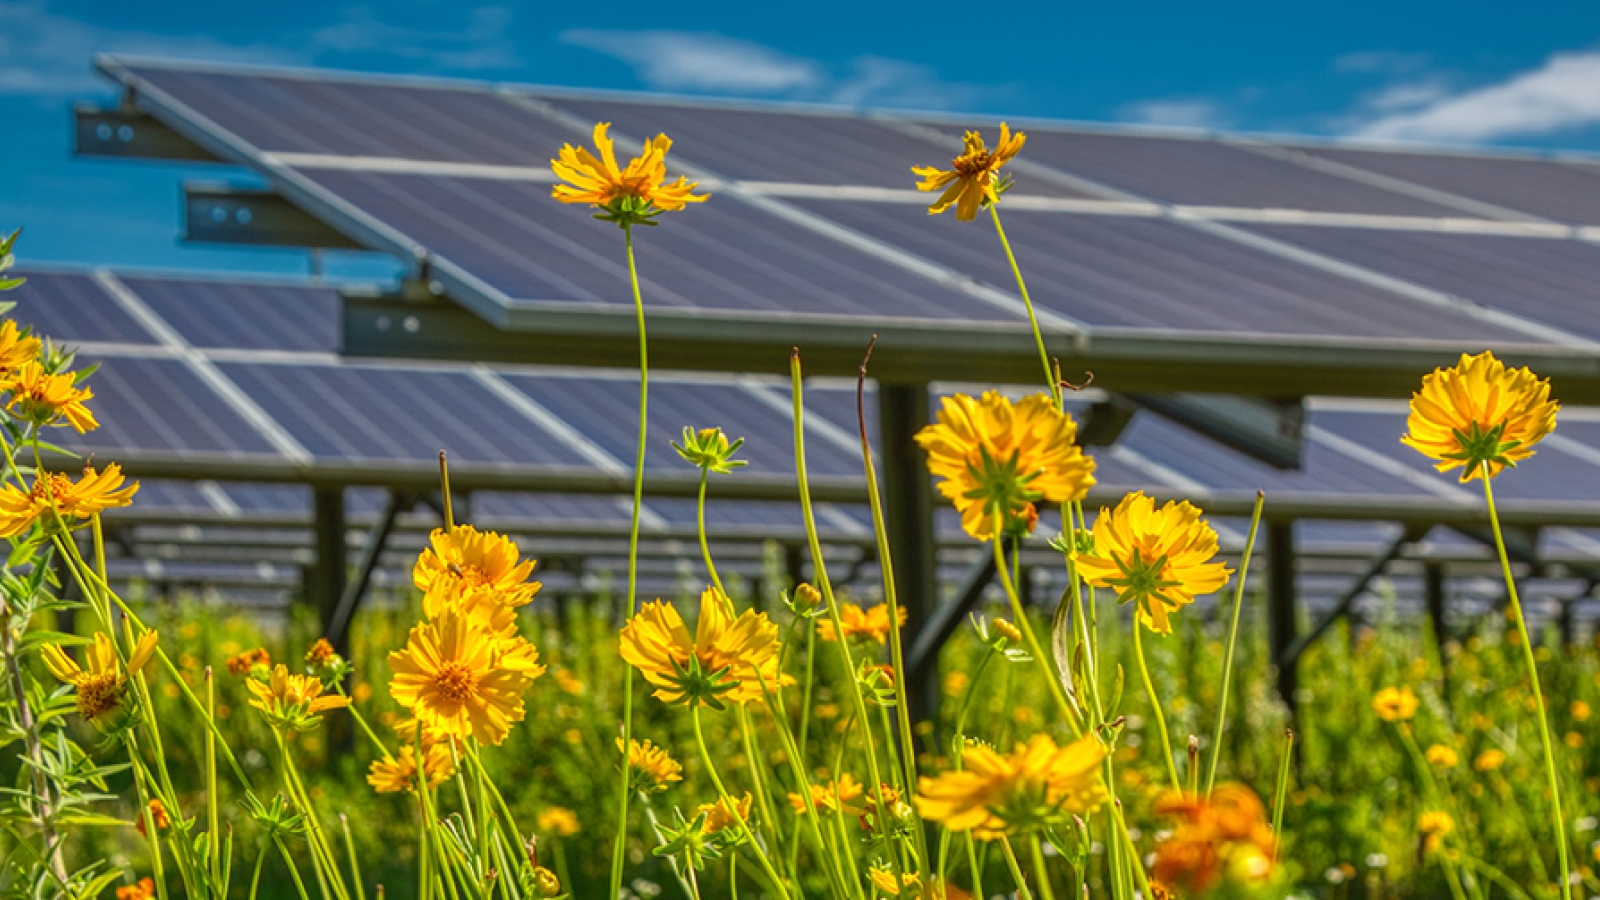 wildflowers in front of a solar panel